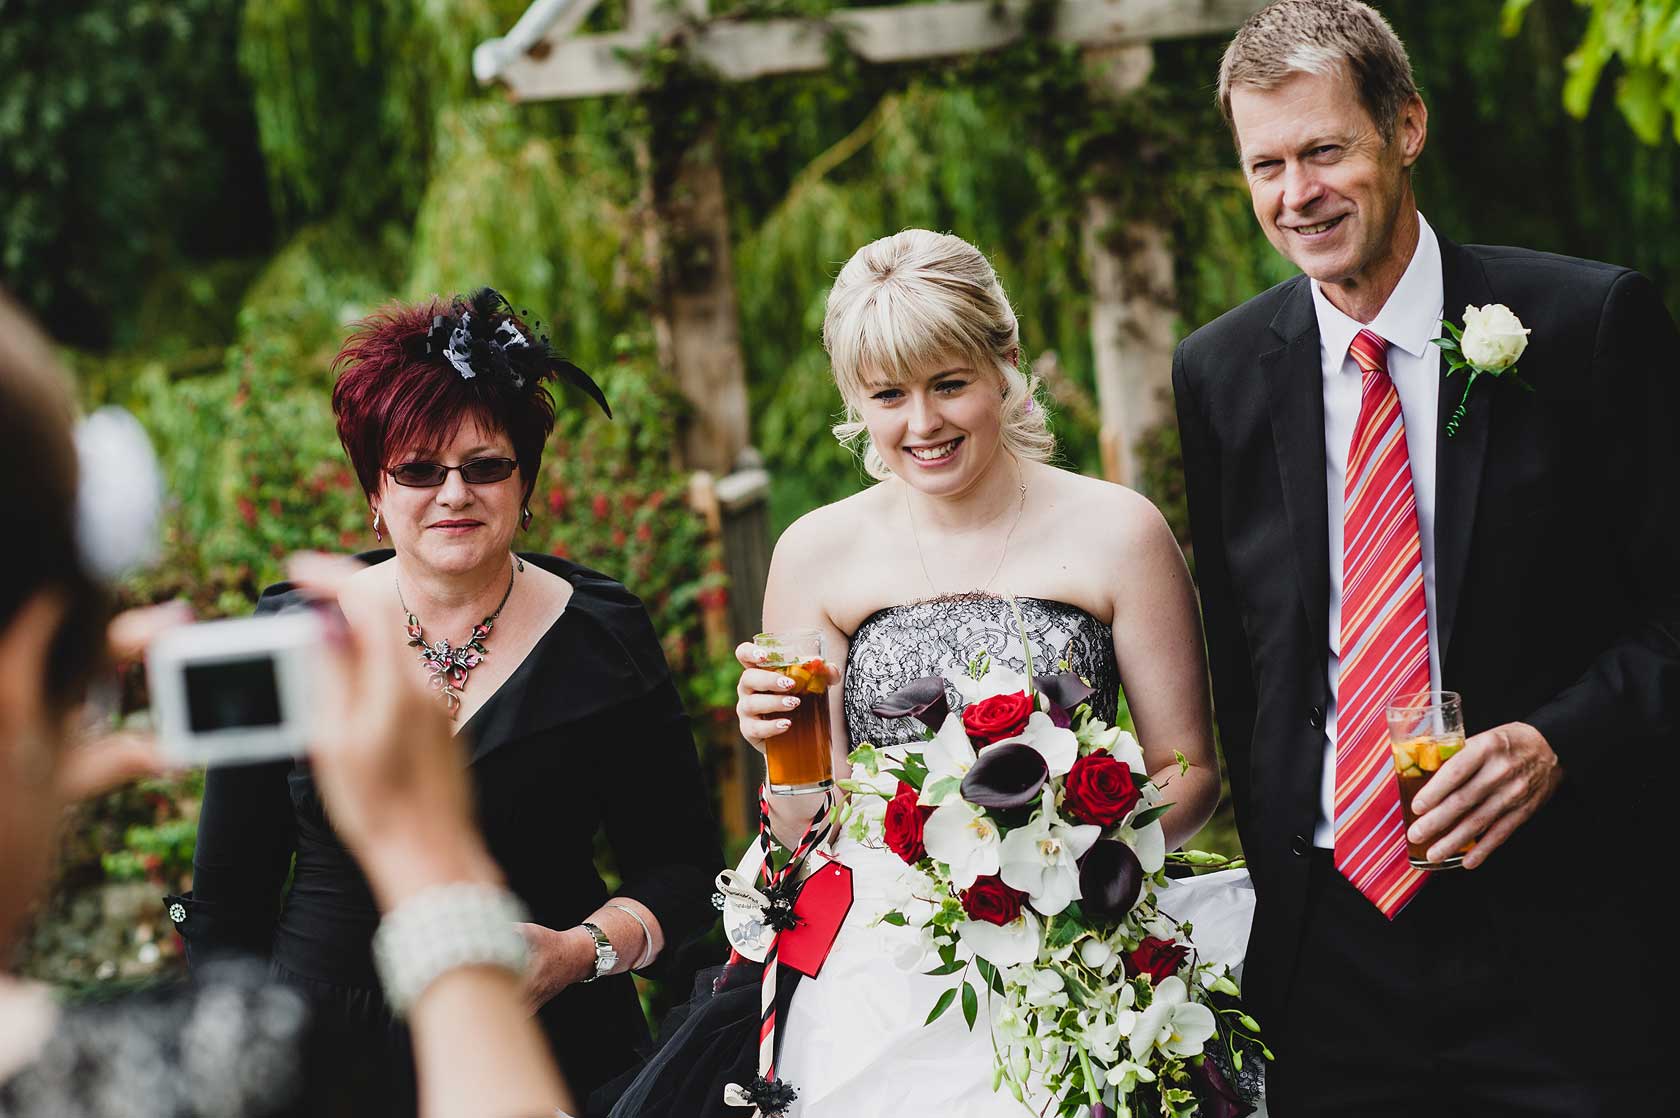 Reportage Wedding Photography at Butley Priory